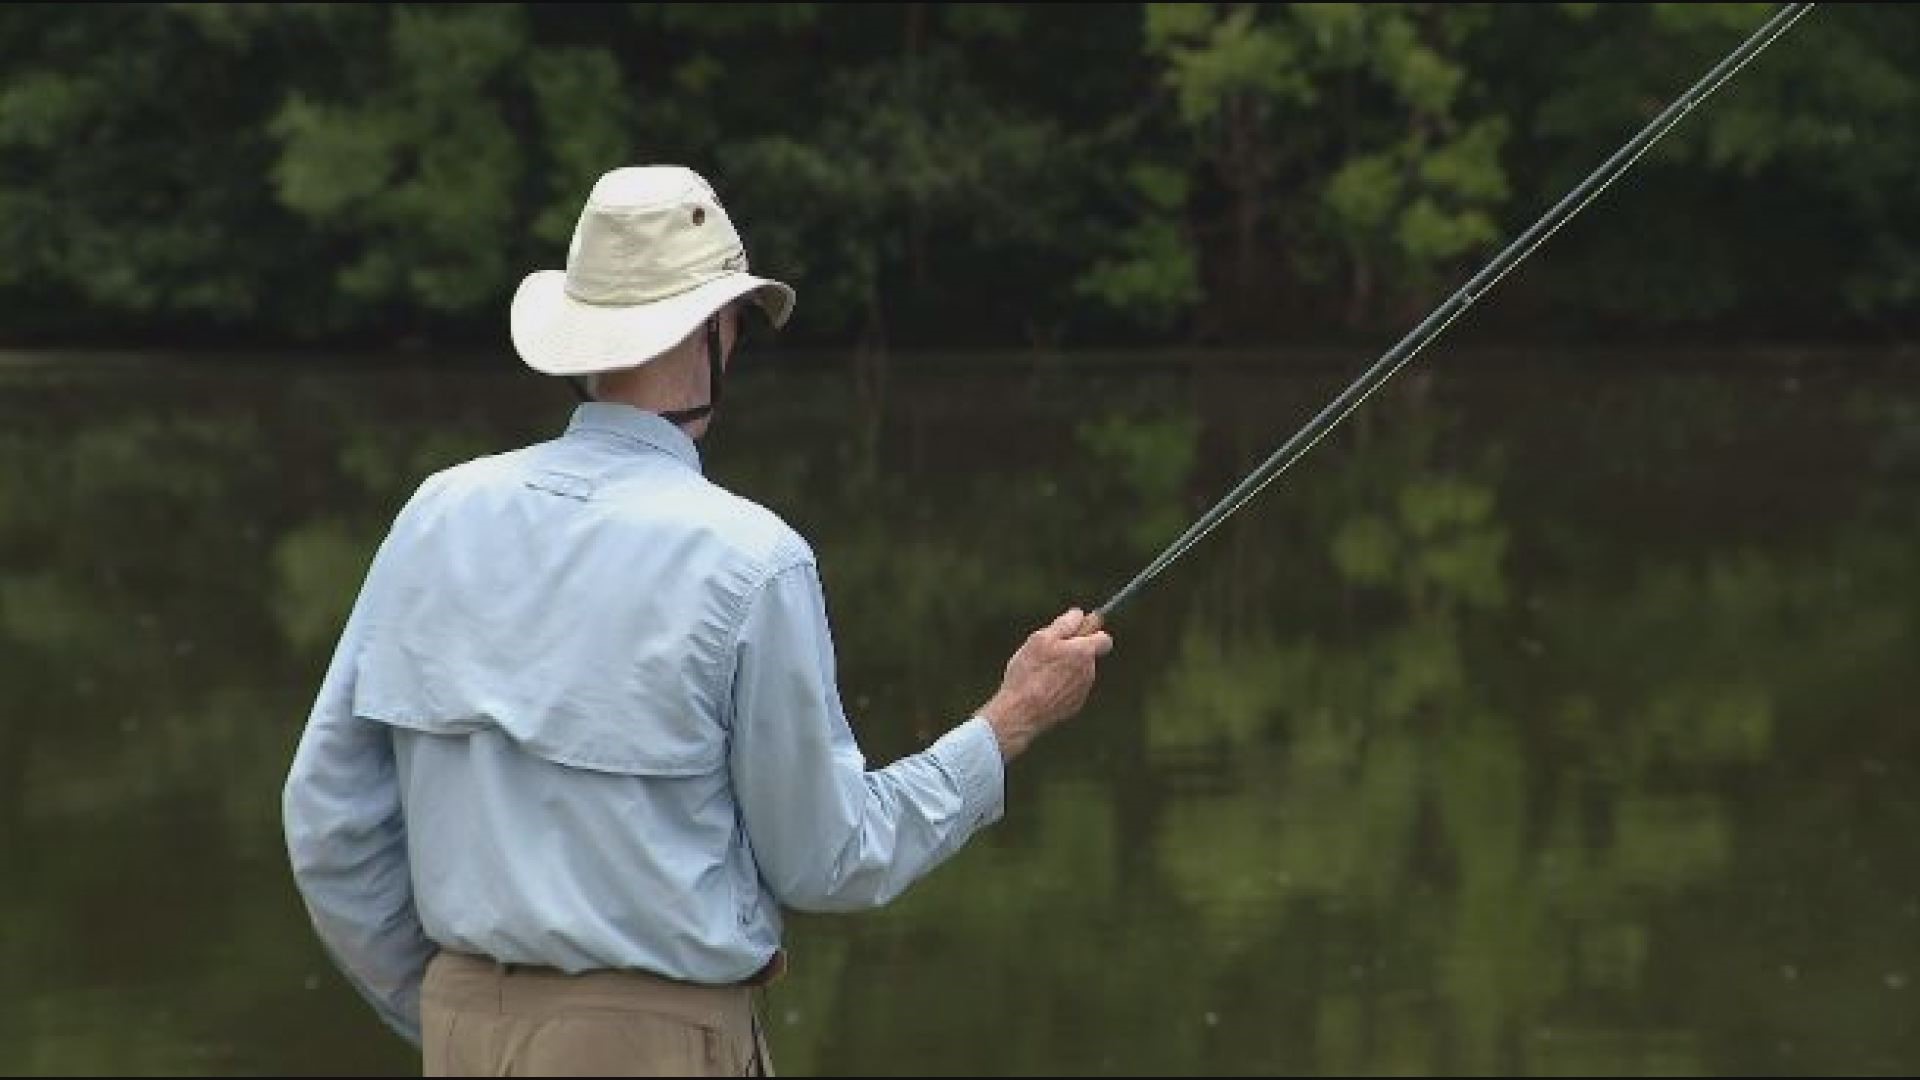 “I think that’s an incredible experience, and I’m grateful for fly fishing to give that relationship to my dad and I"